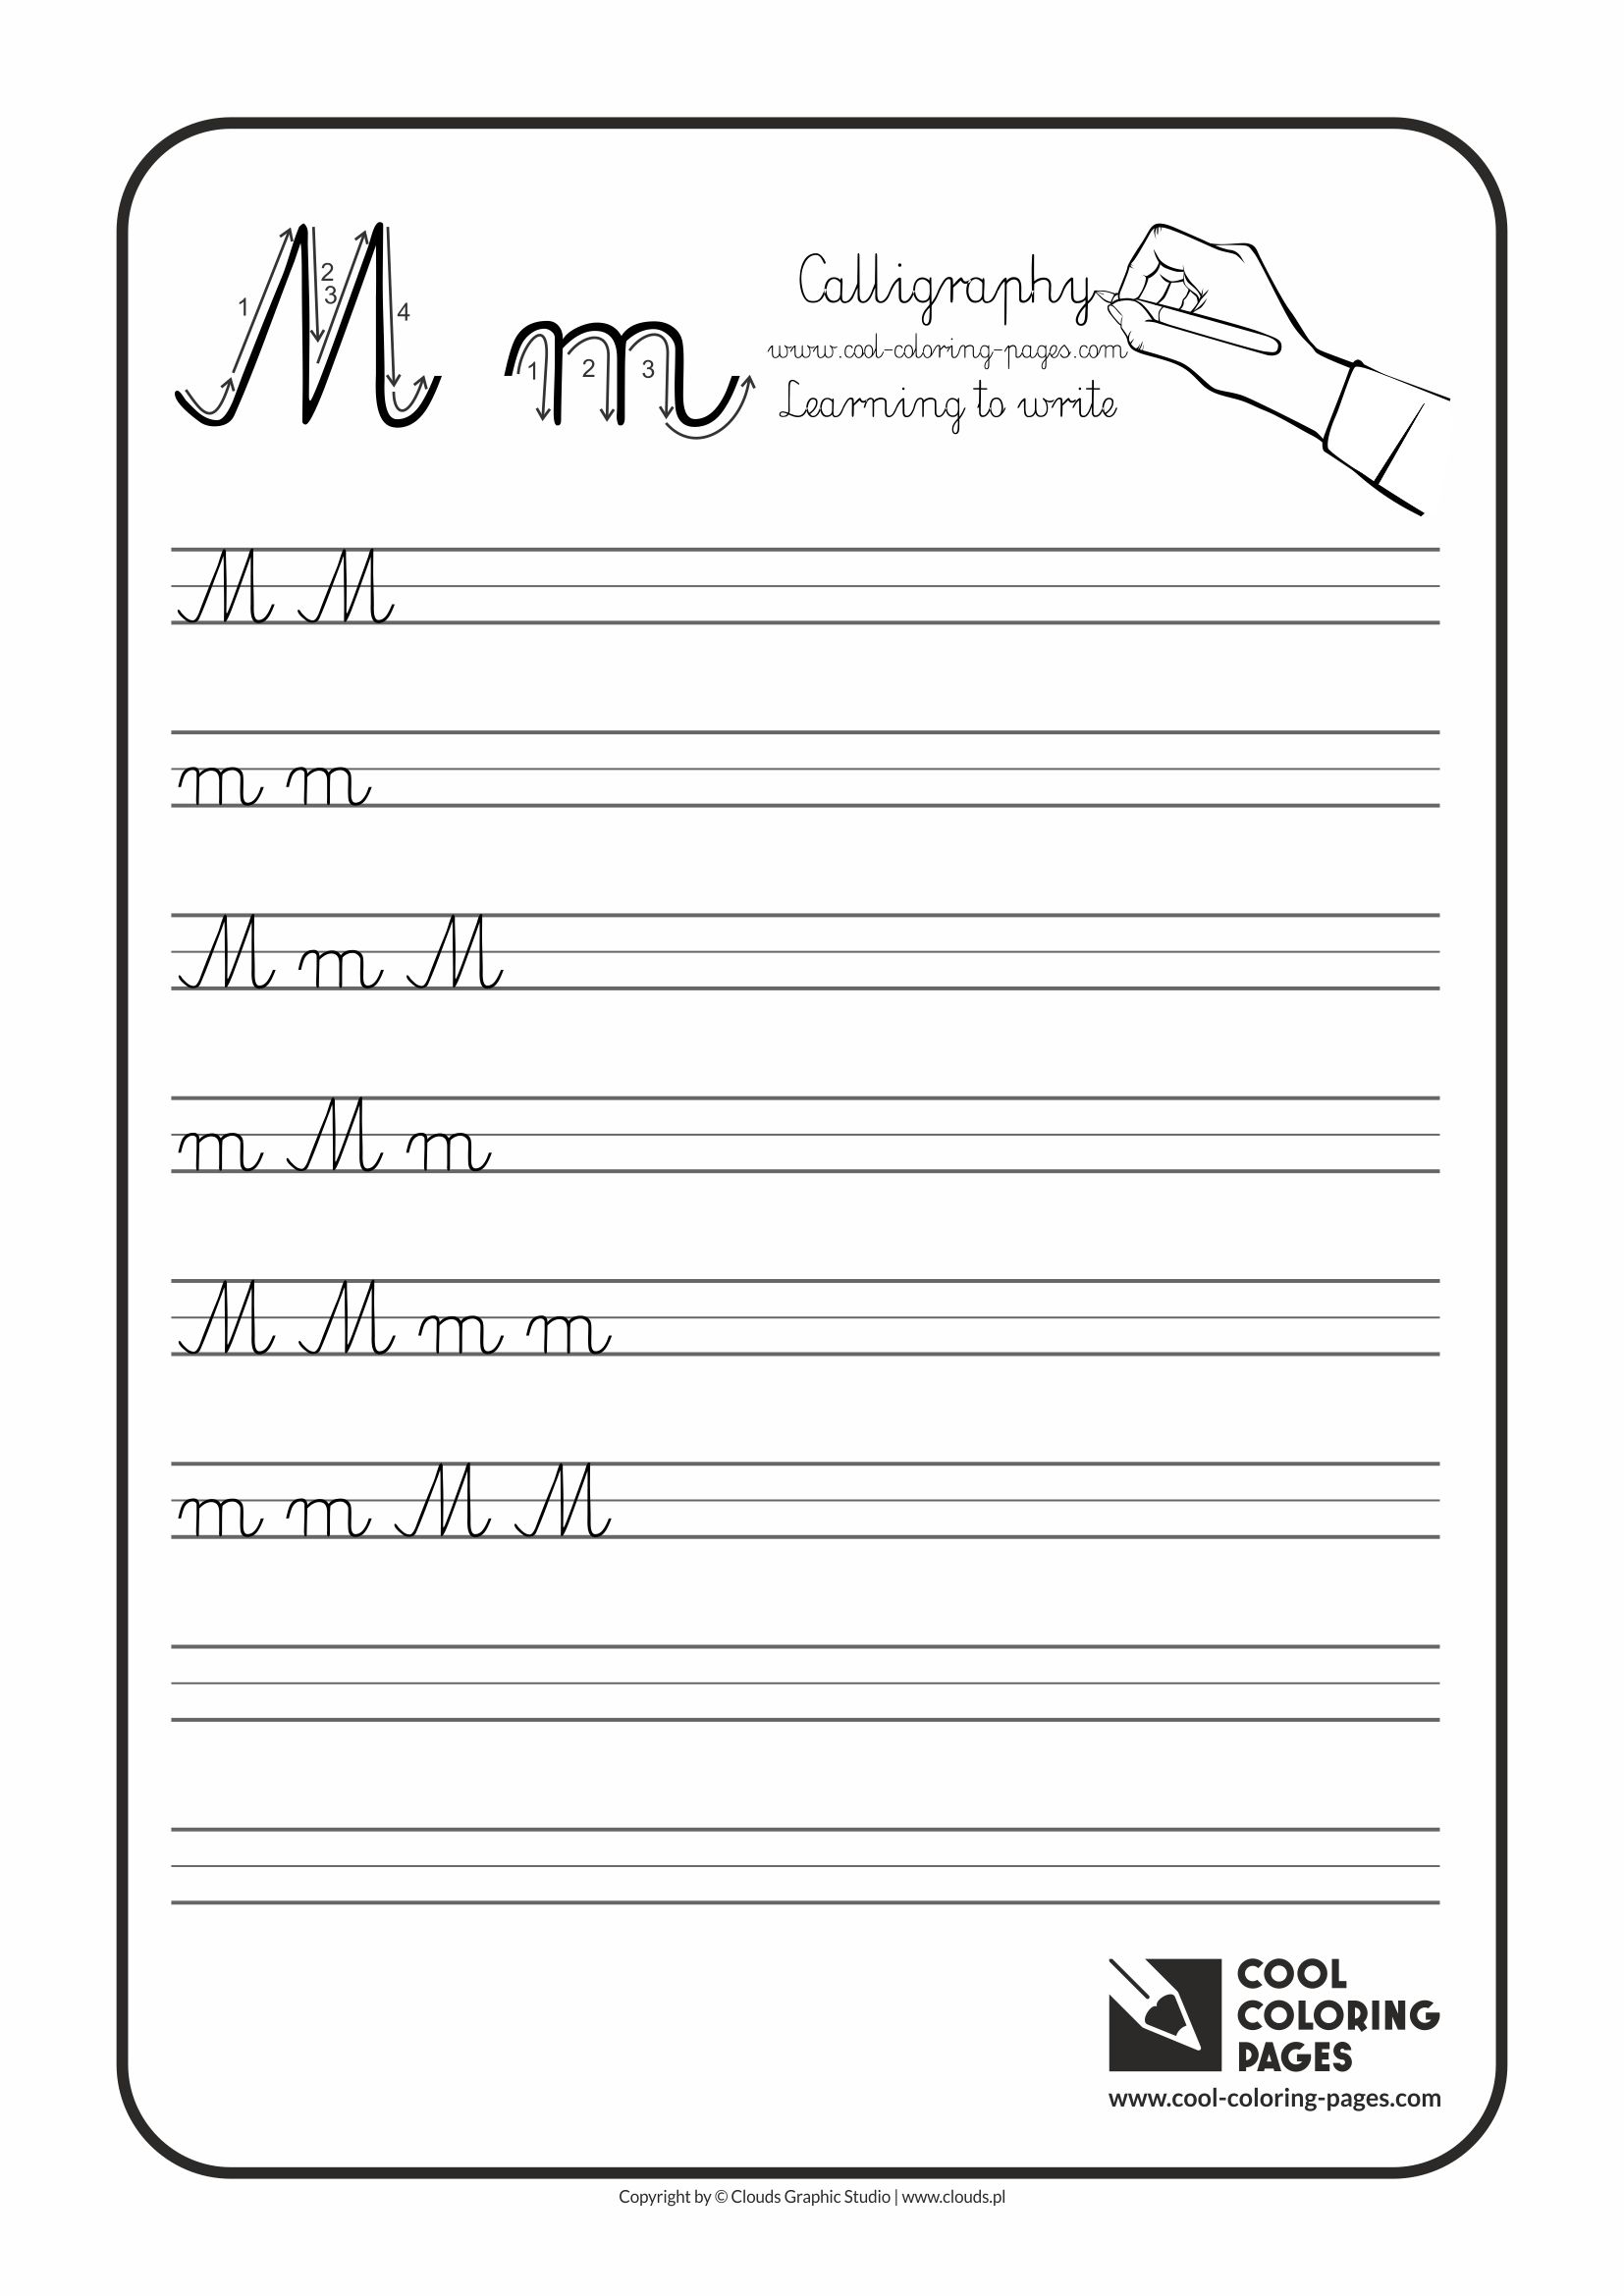 Cool Coloring Pages / Calligraphy / Letter M - Handwriting for kids / Worksheets